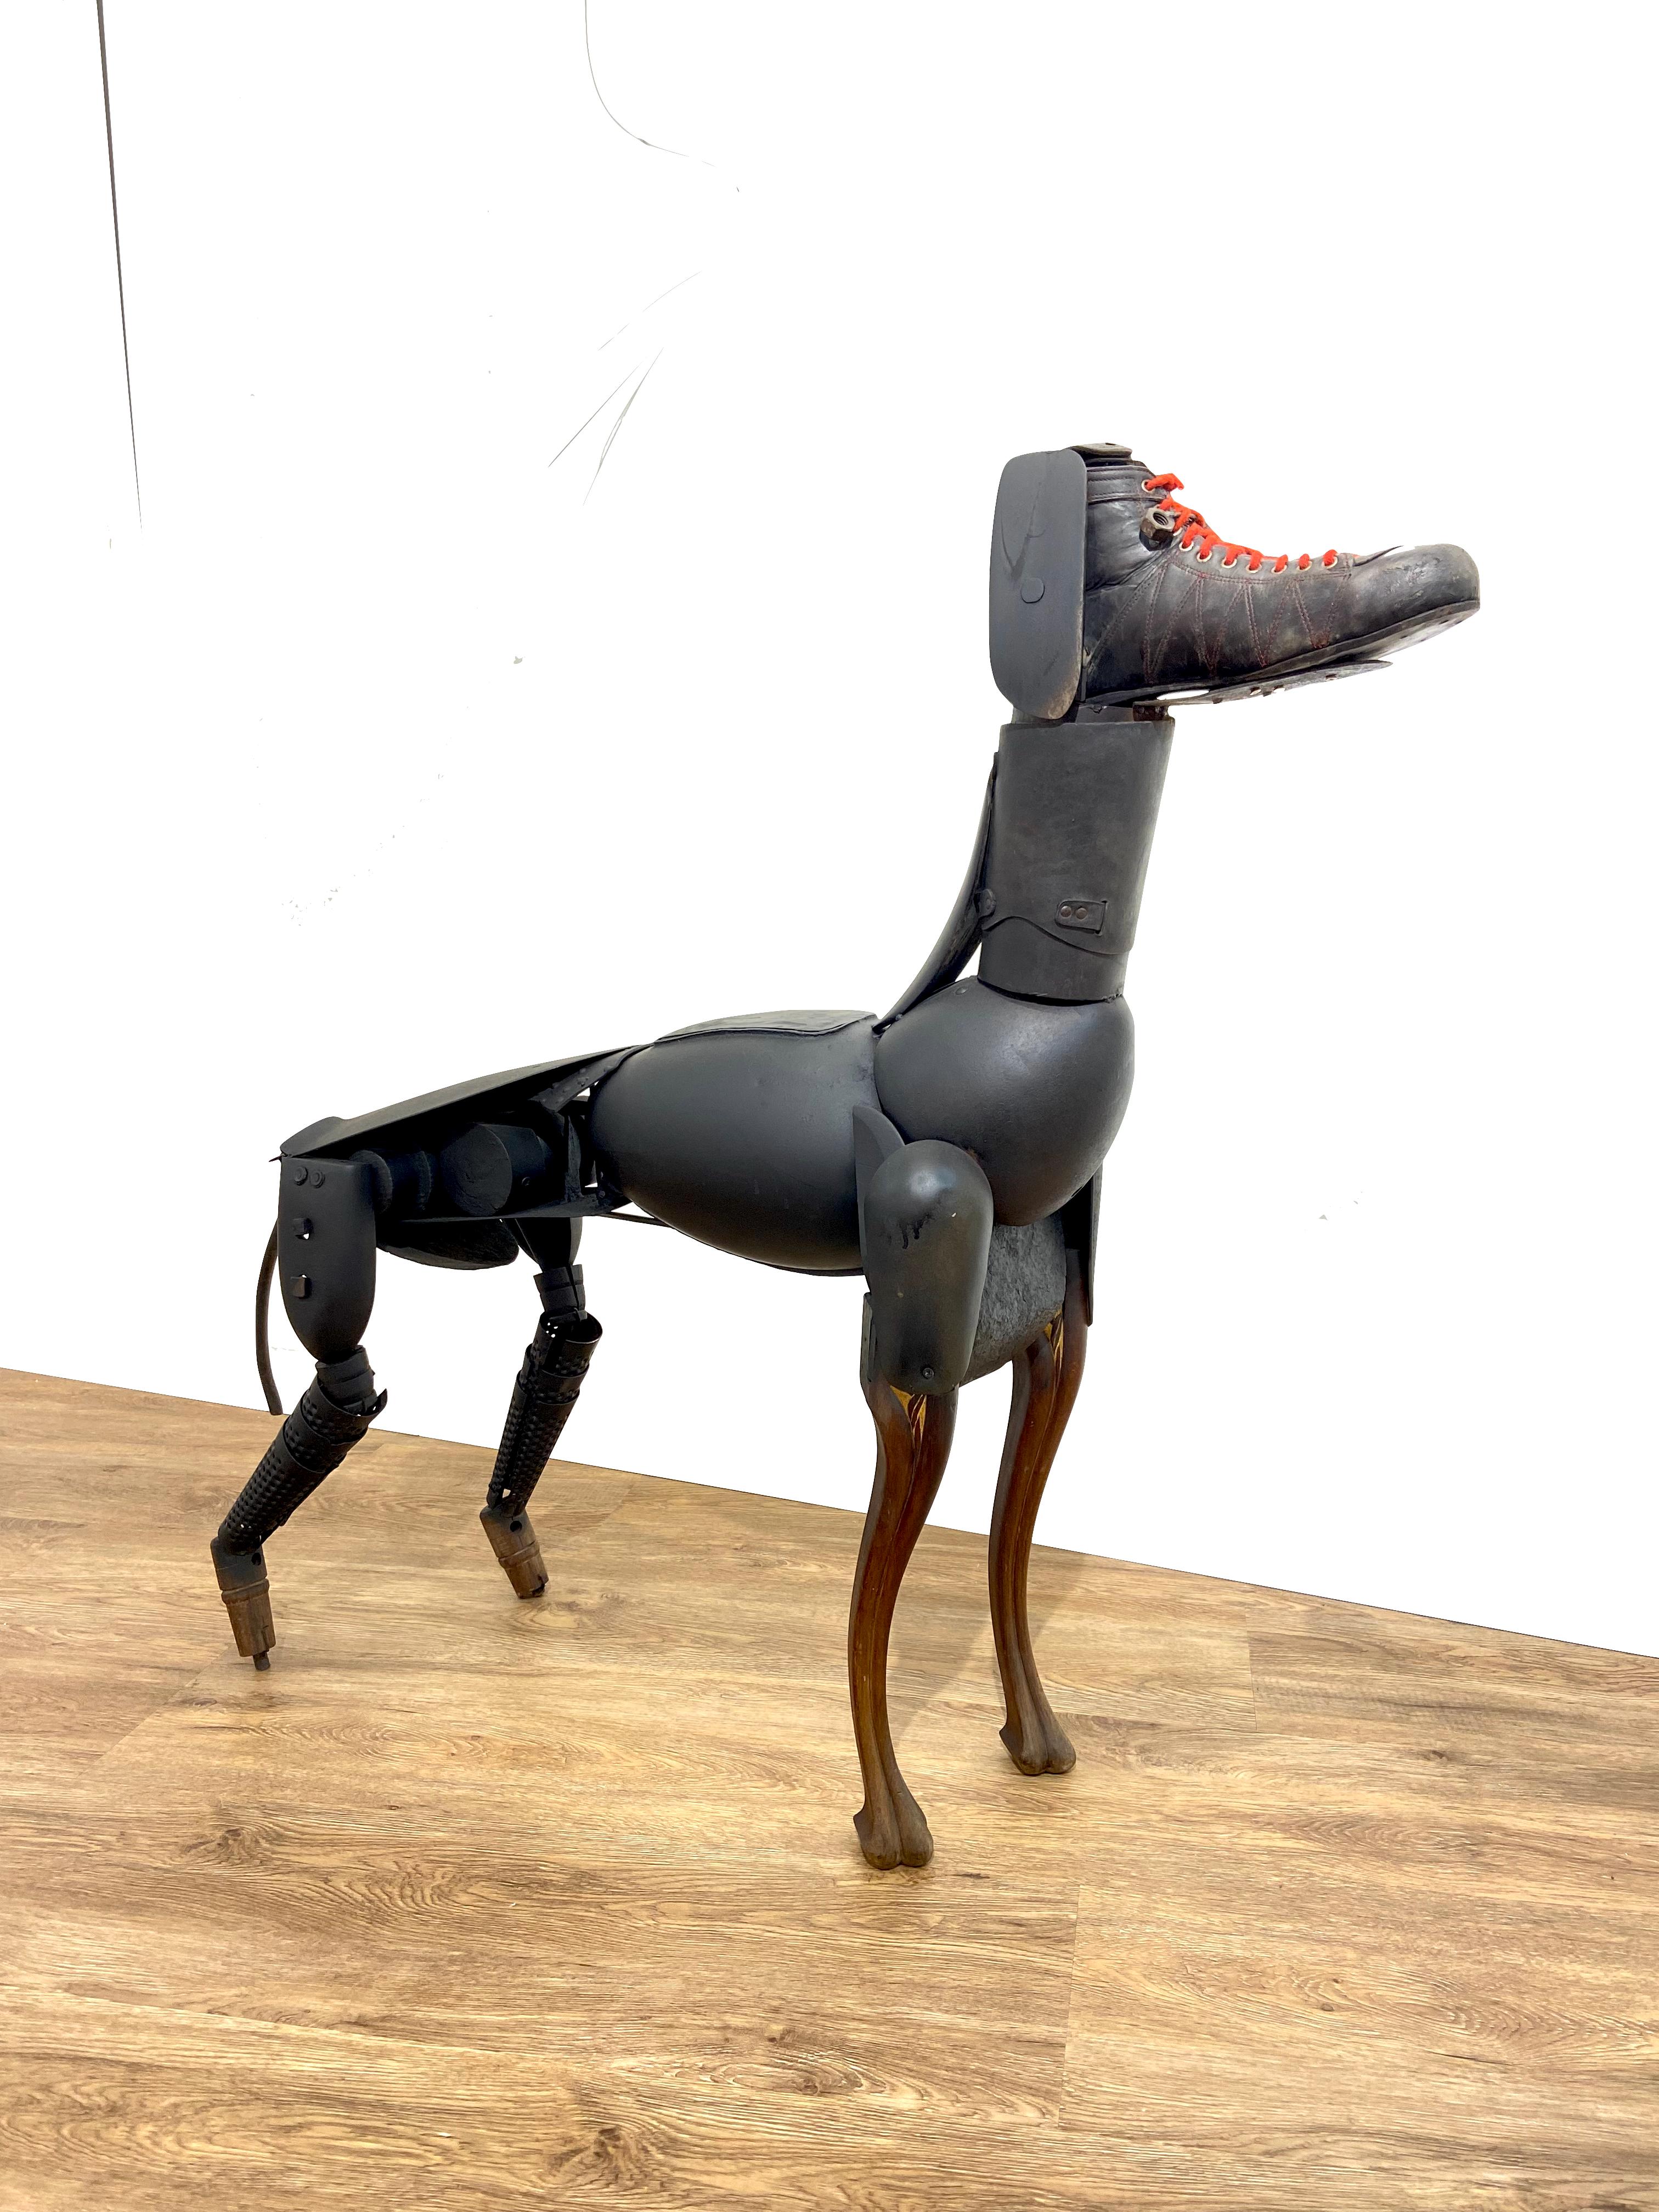 Zac - 21st Century, Contemporary Sculpture, Figurative, Recycled Objects